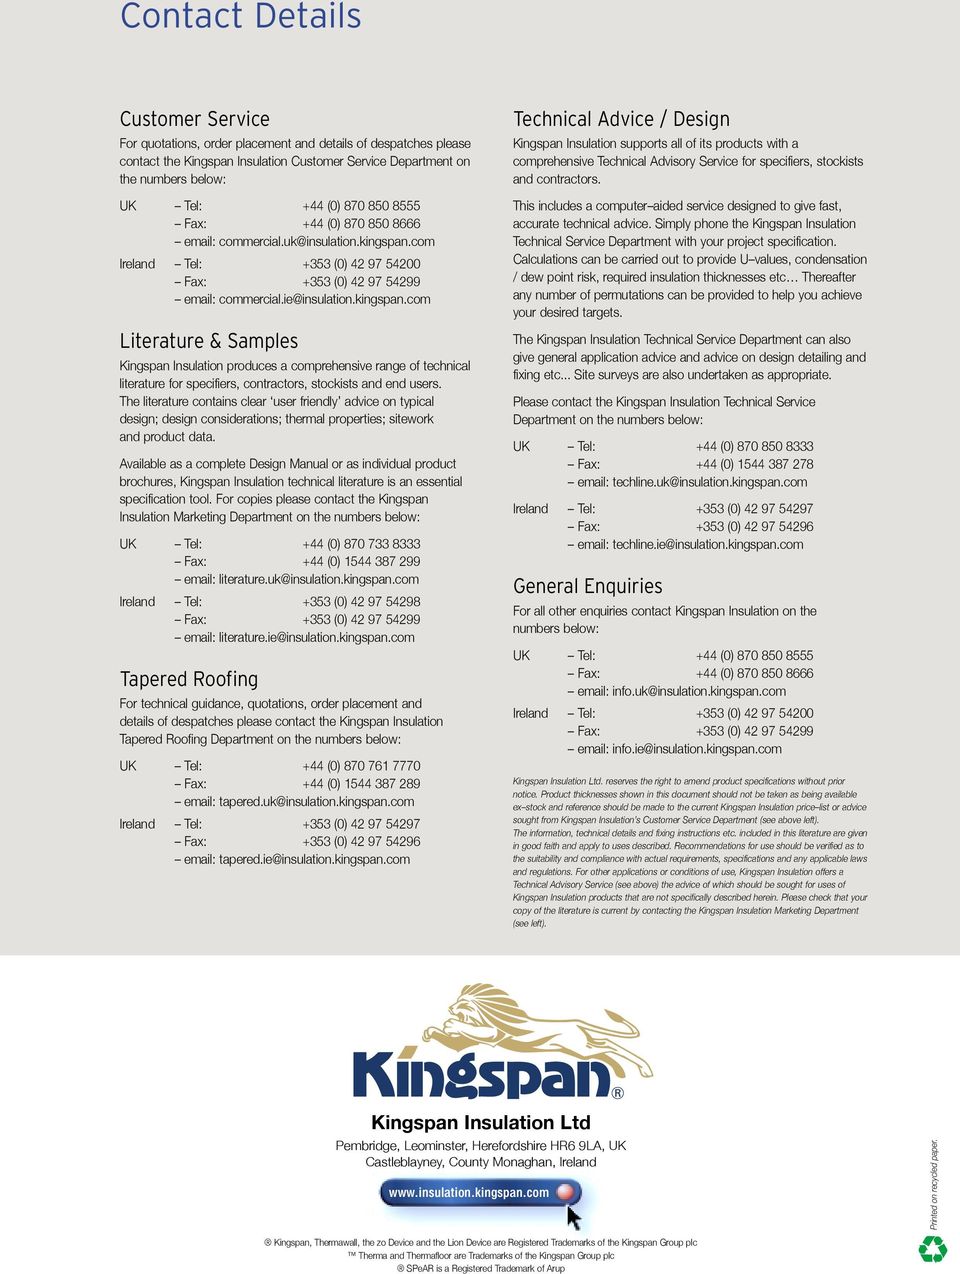 com Ireland Tel: +353 (0) 42 97 54200 Fax: +353 (0) 42 97 54299 email: commercial.ie@insulation.kingspan.